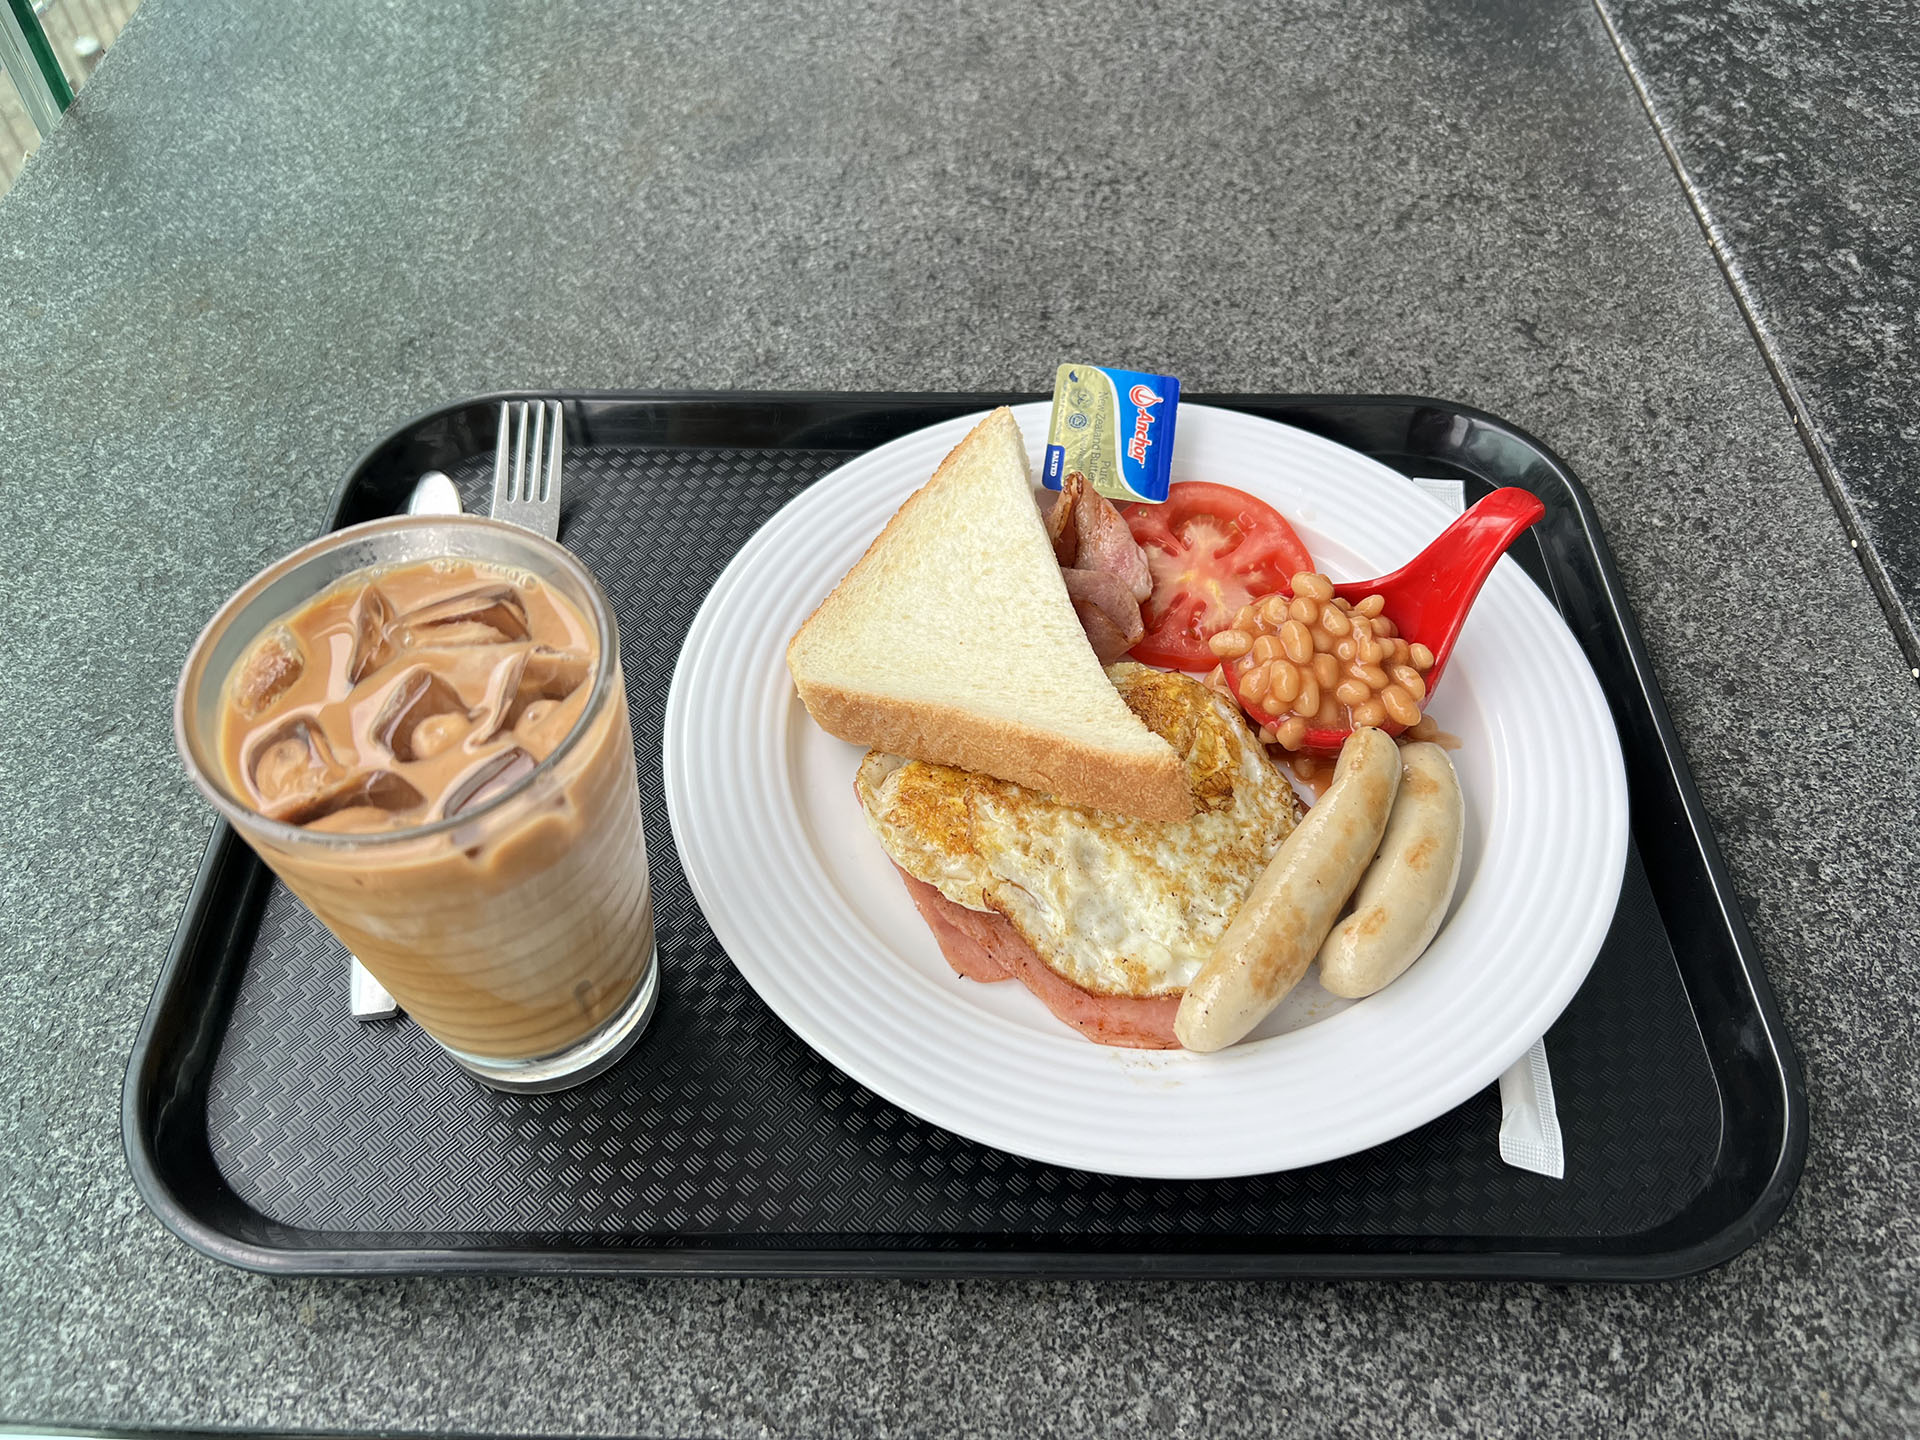 All-Day Breakfast at HKUST American Diner (with Bacon)